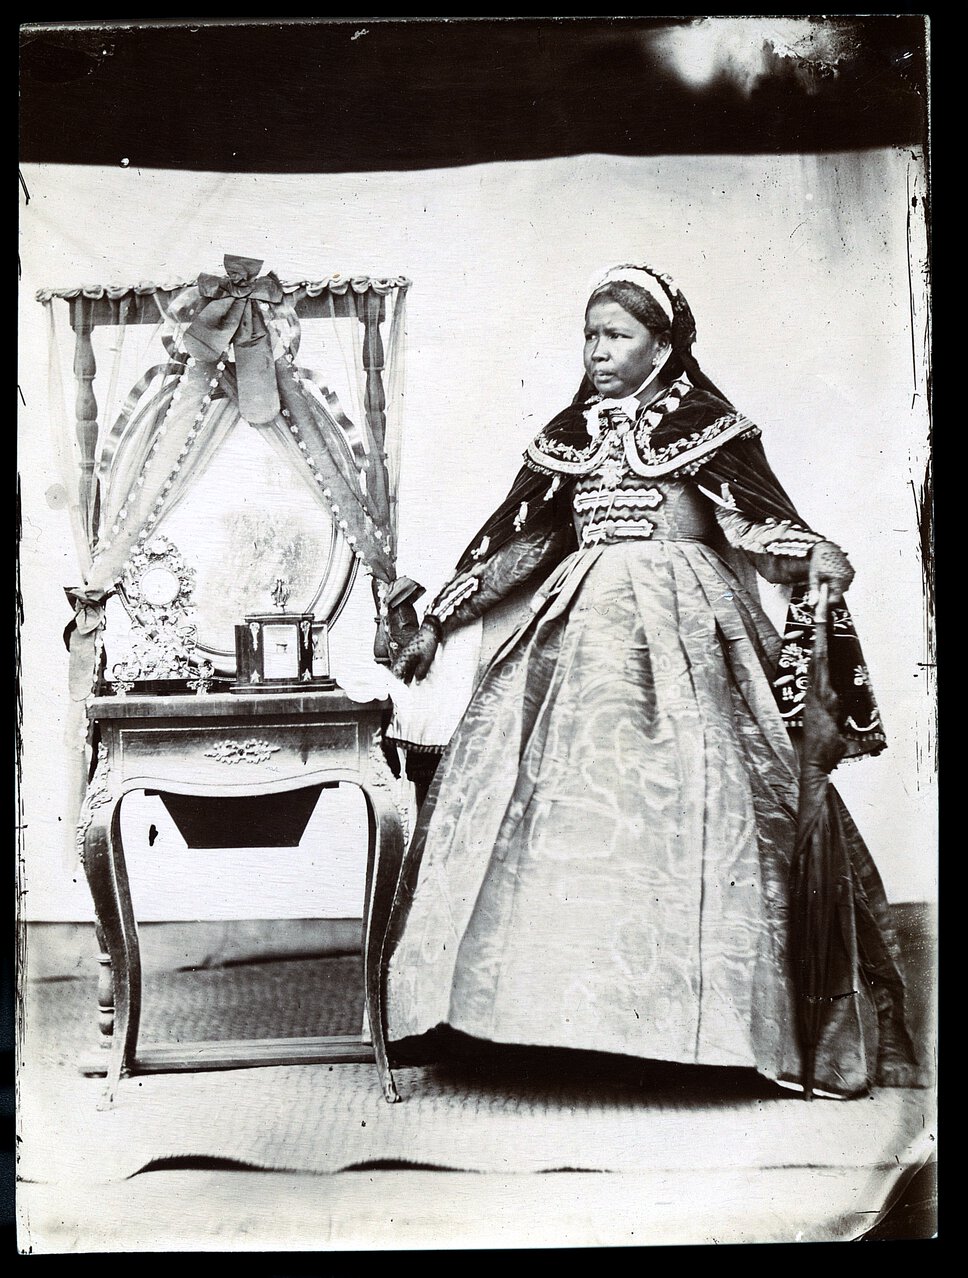 Ranavalona II in regal attire, standing, looking right, with an umbrella, beside a table and mirror.